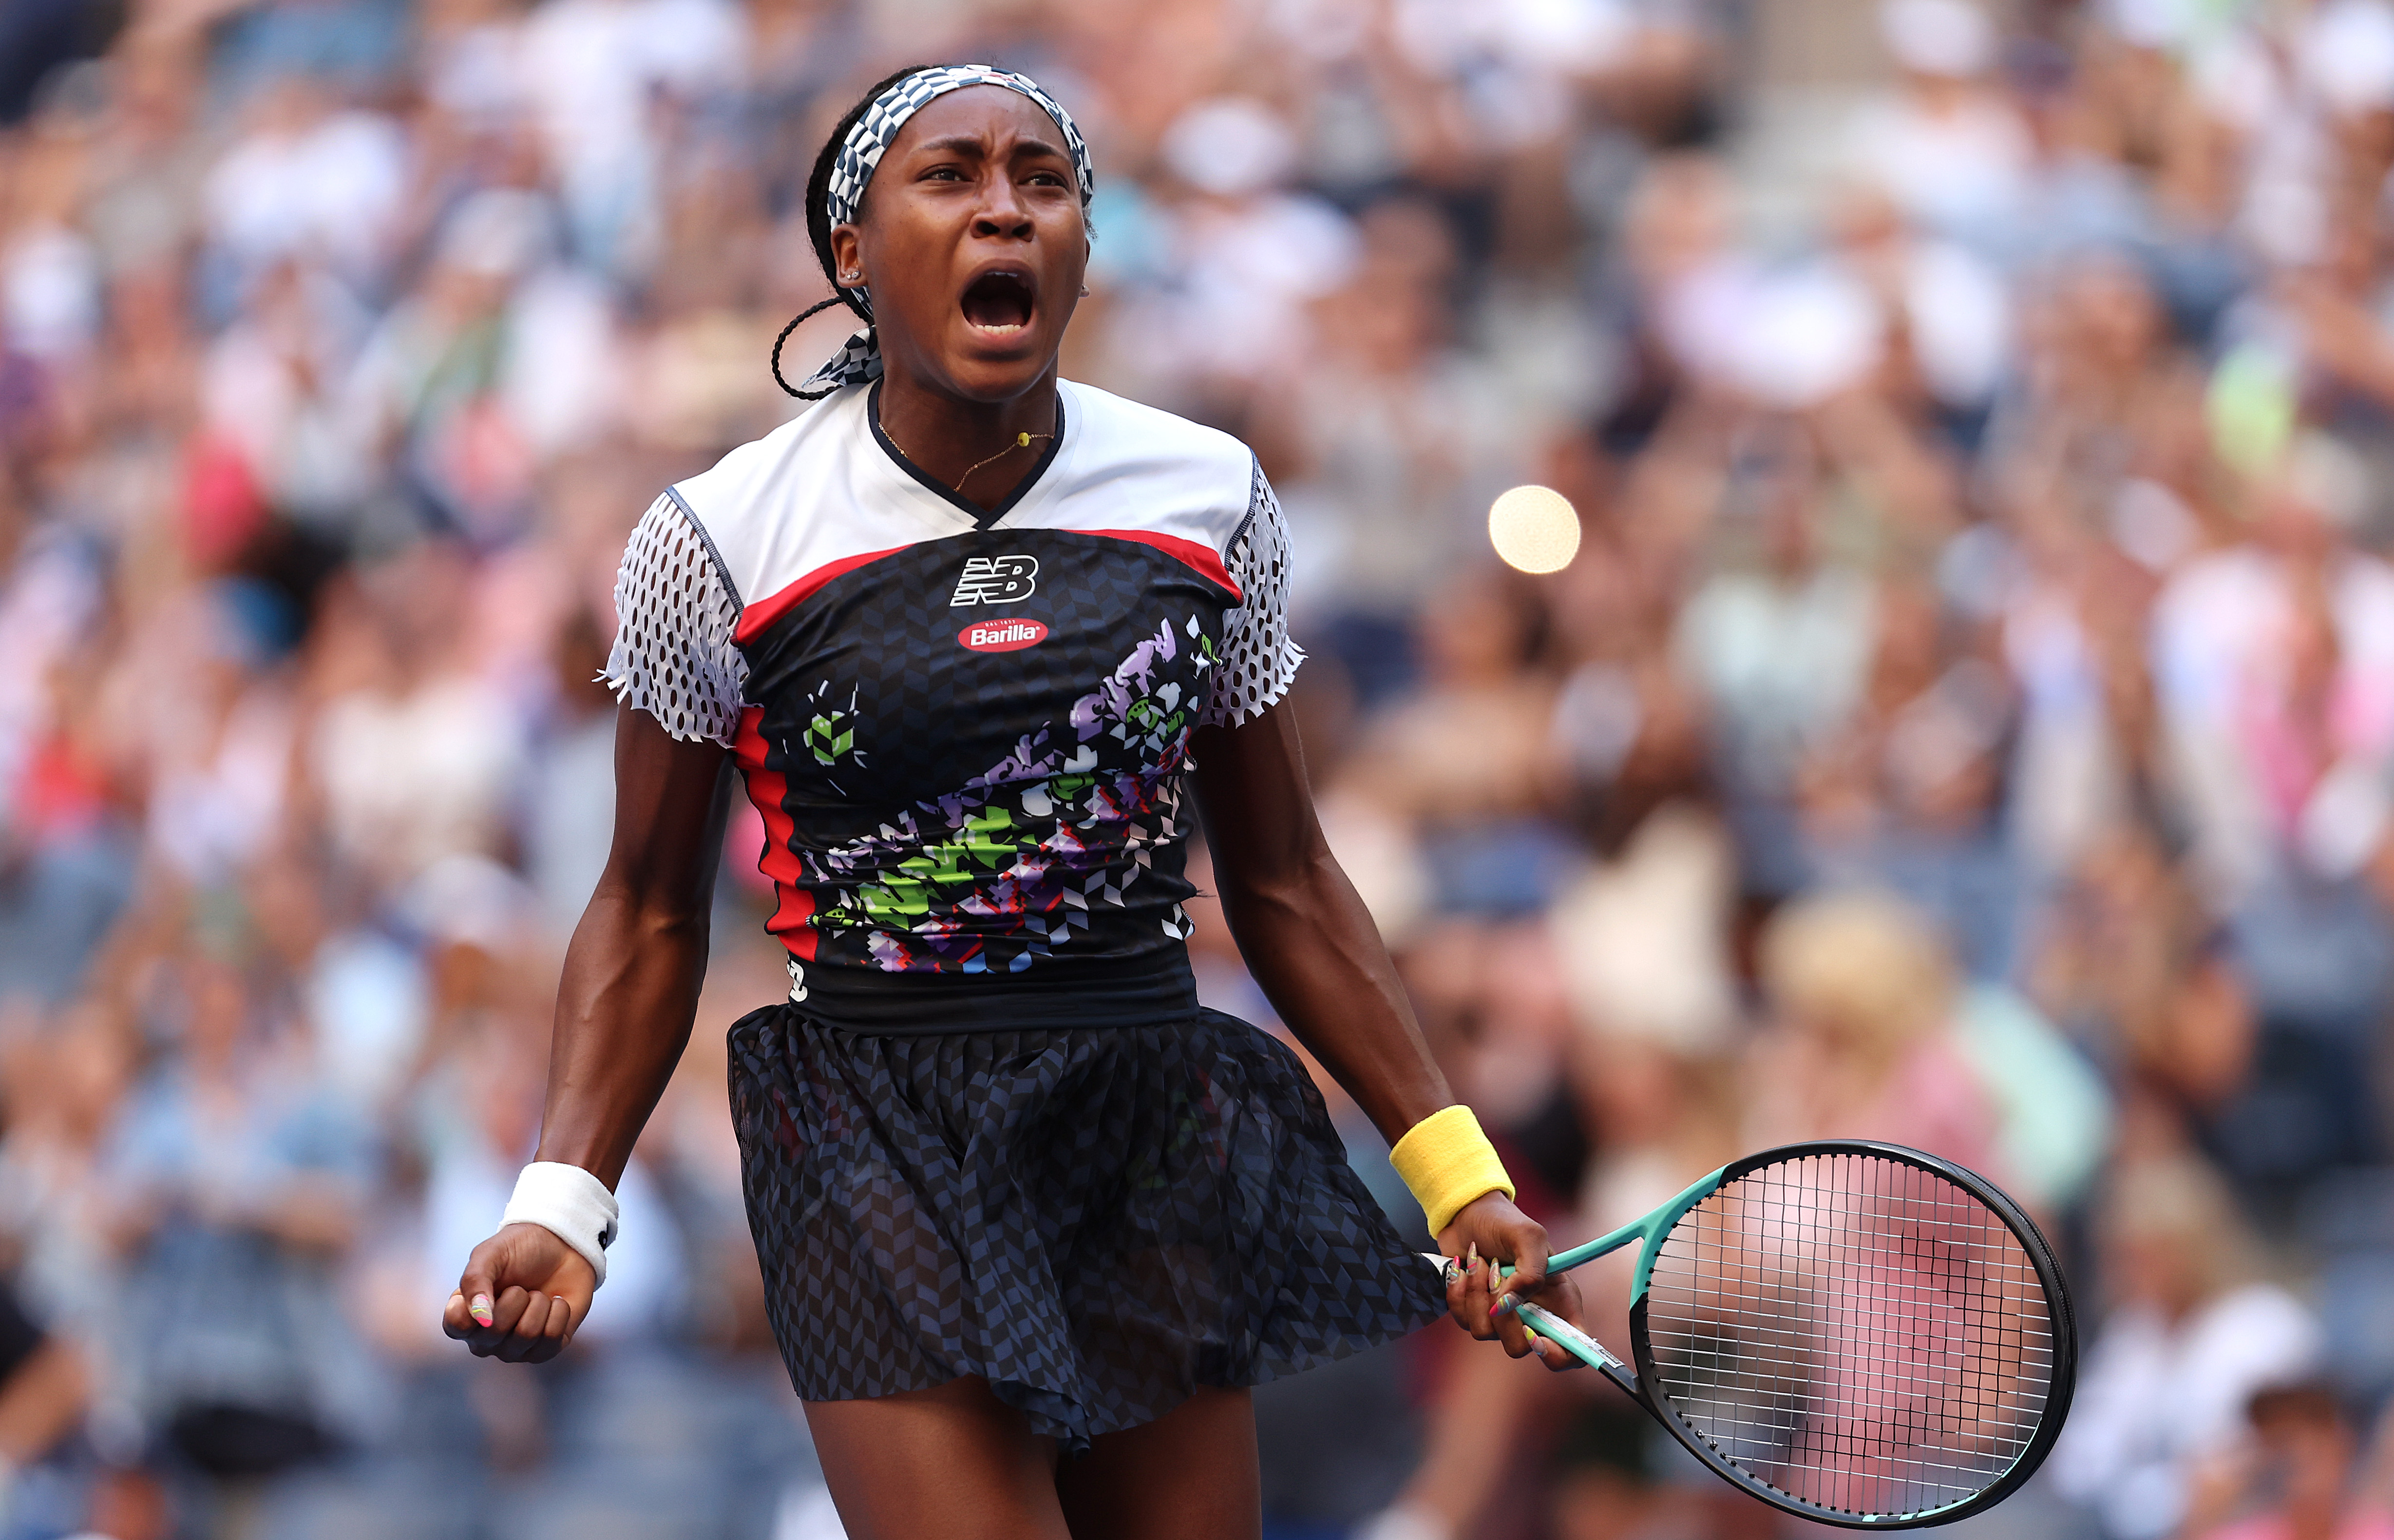 Coco Gauff of the United States celebrates defeating Madison Keys of the United States during their Women’s Singles Third Round match on Day Five of the 2022 US Open at USTA Billie Jean King National Tennis Center on September 02, 2022 in the Flushing neighborhood of the Queens borough of New York City.